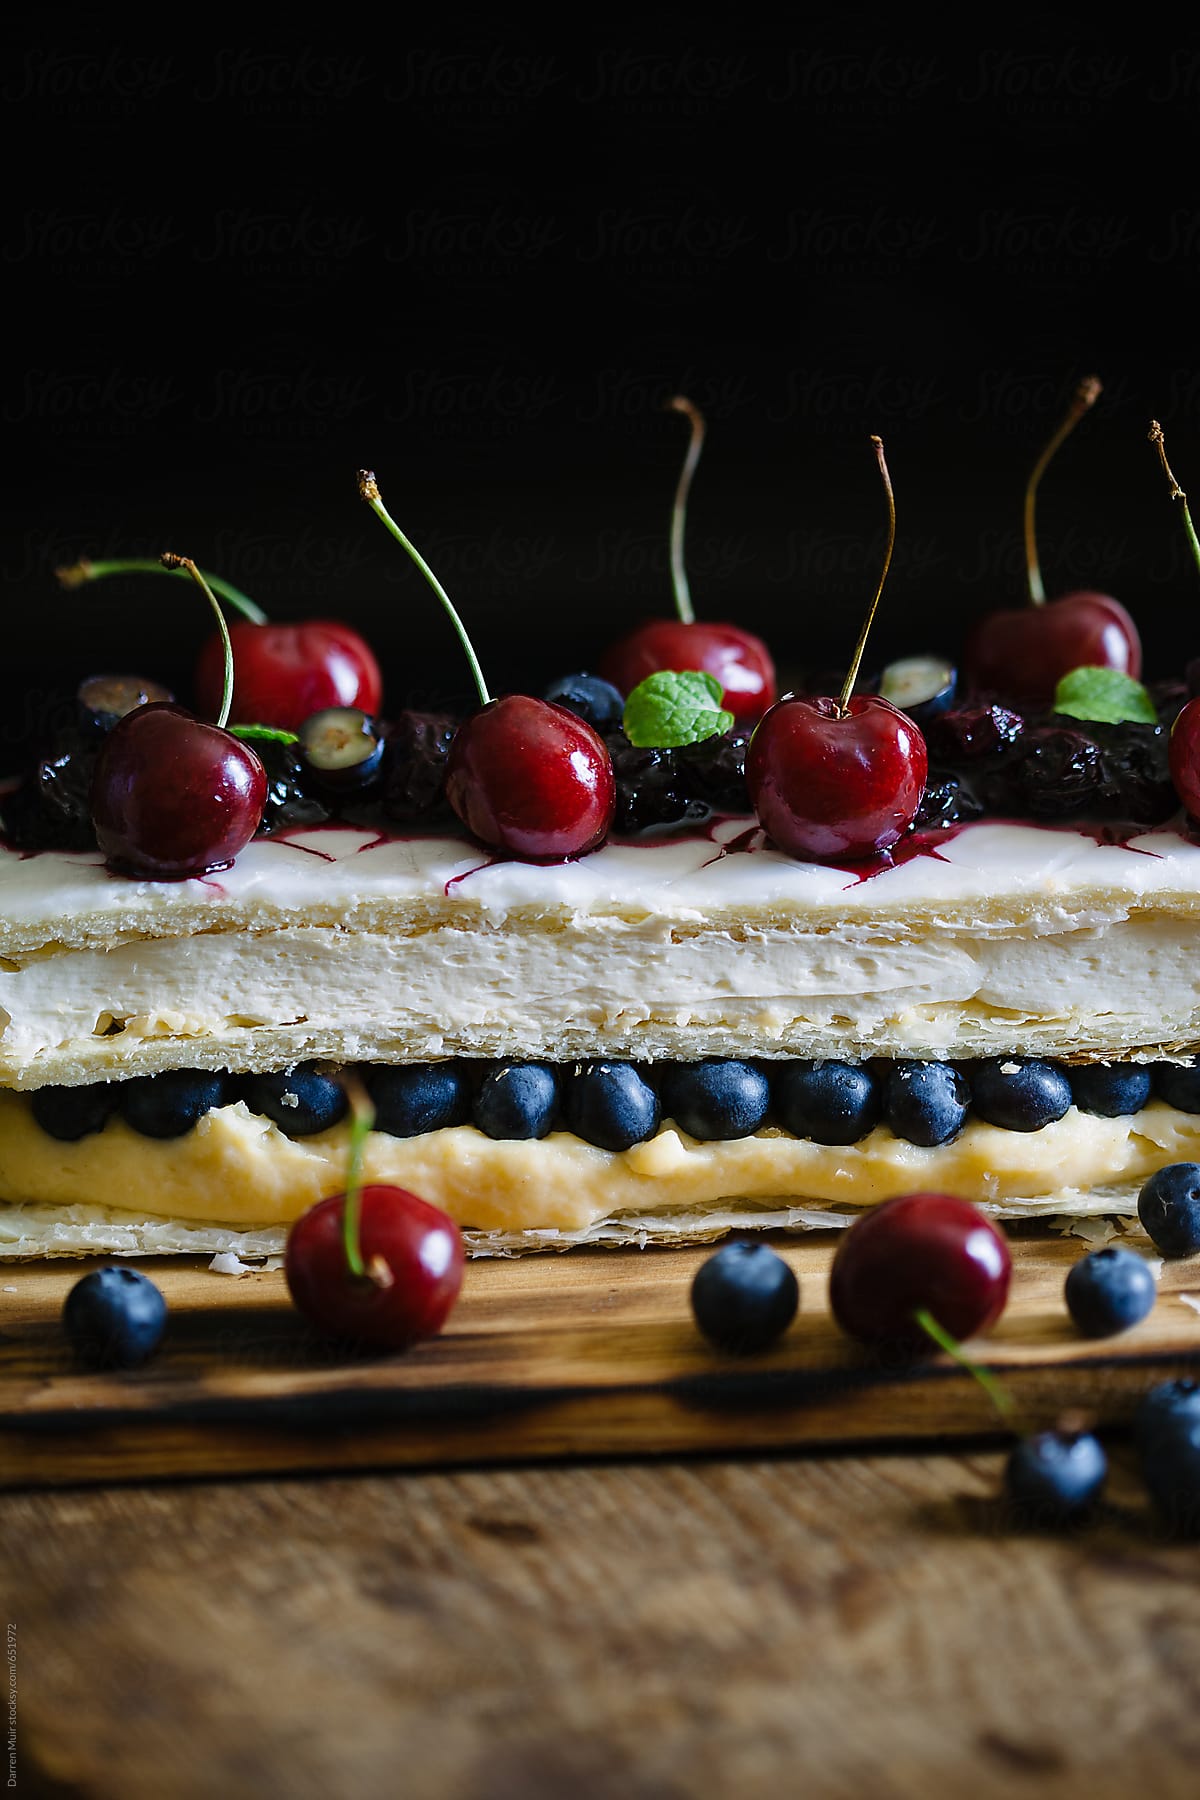 French pastry cake with fruits and cream.